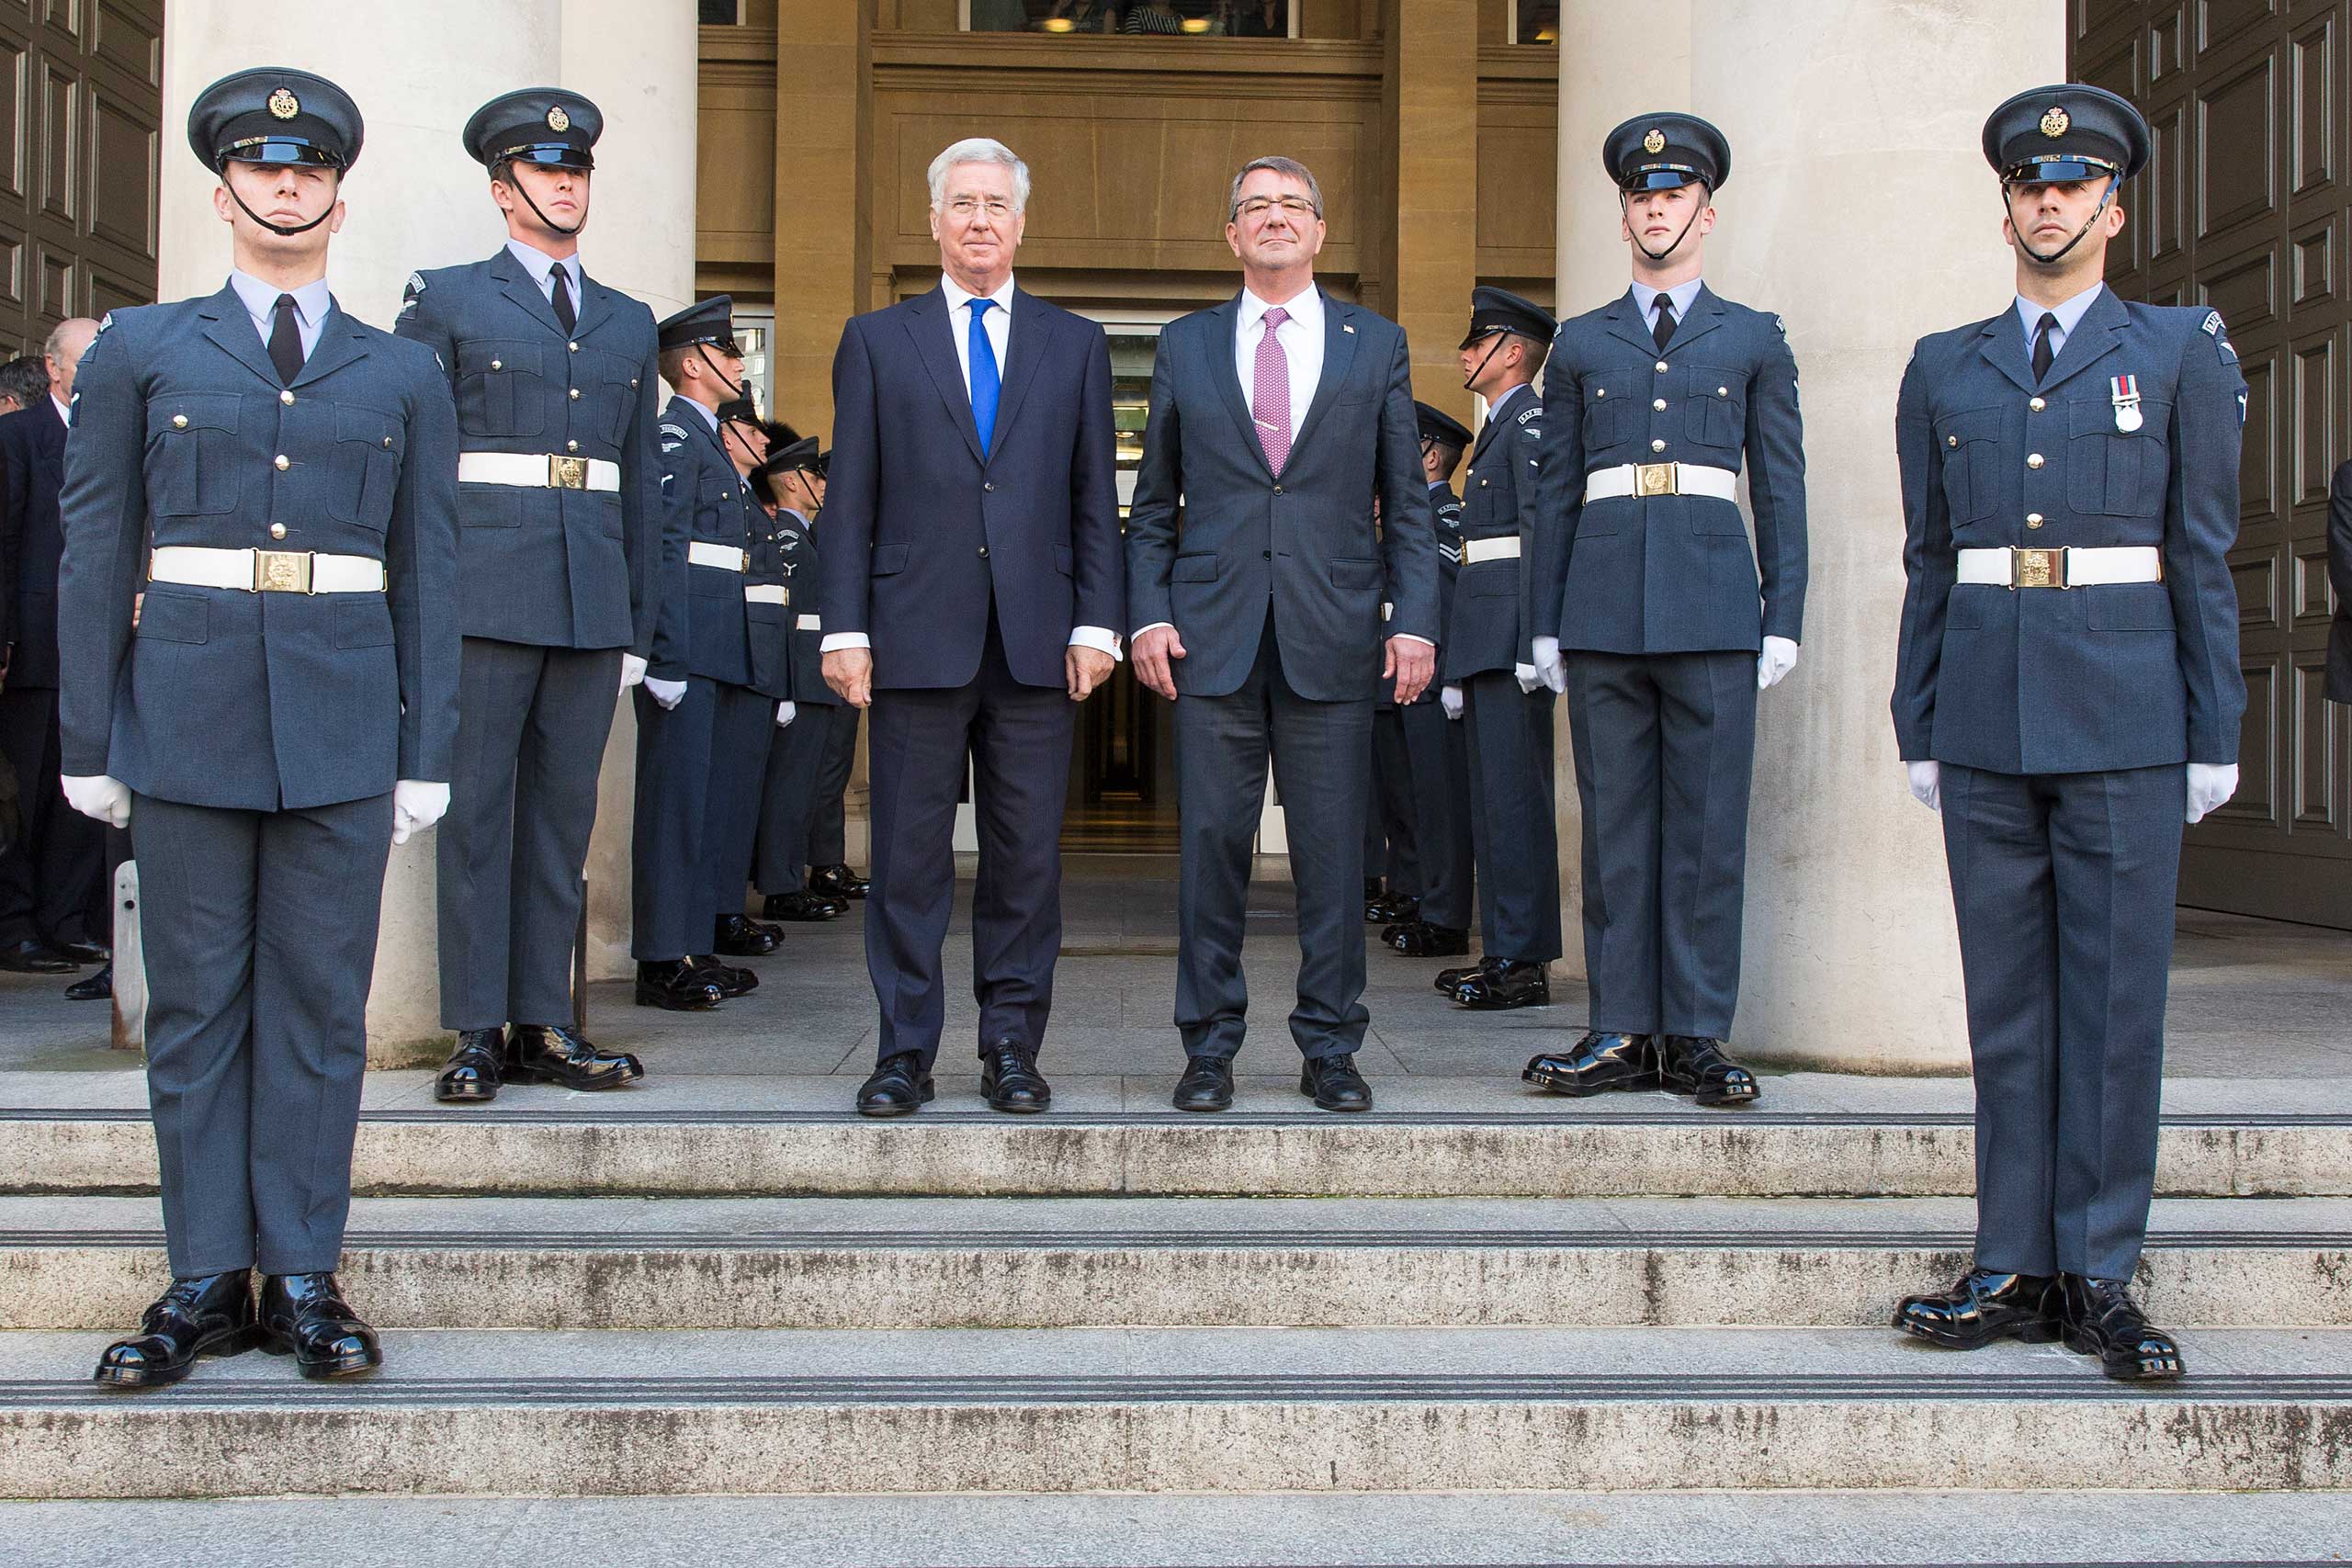 British State Secreatary for Defense Michael Fallon (C-L) and his US counterpart Ashton Carter (C-R) observing an honor guard during their meeting at the Ministry of Defence Main Building in London, Oct. 9, 2015. (Sgt Ross Tilly Raf/Britsih Ministry of Defence—EPA)